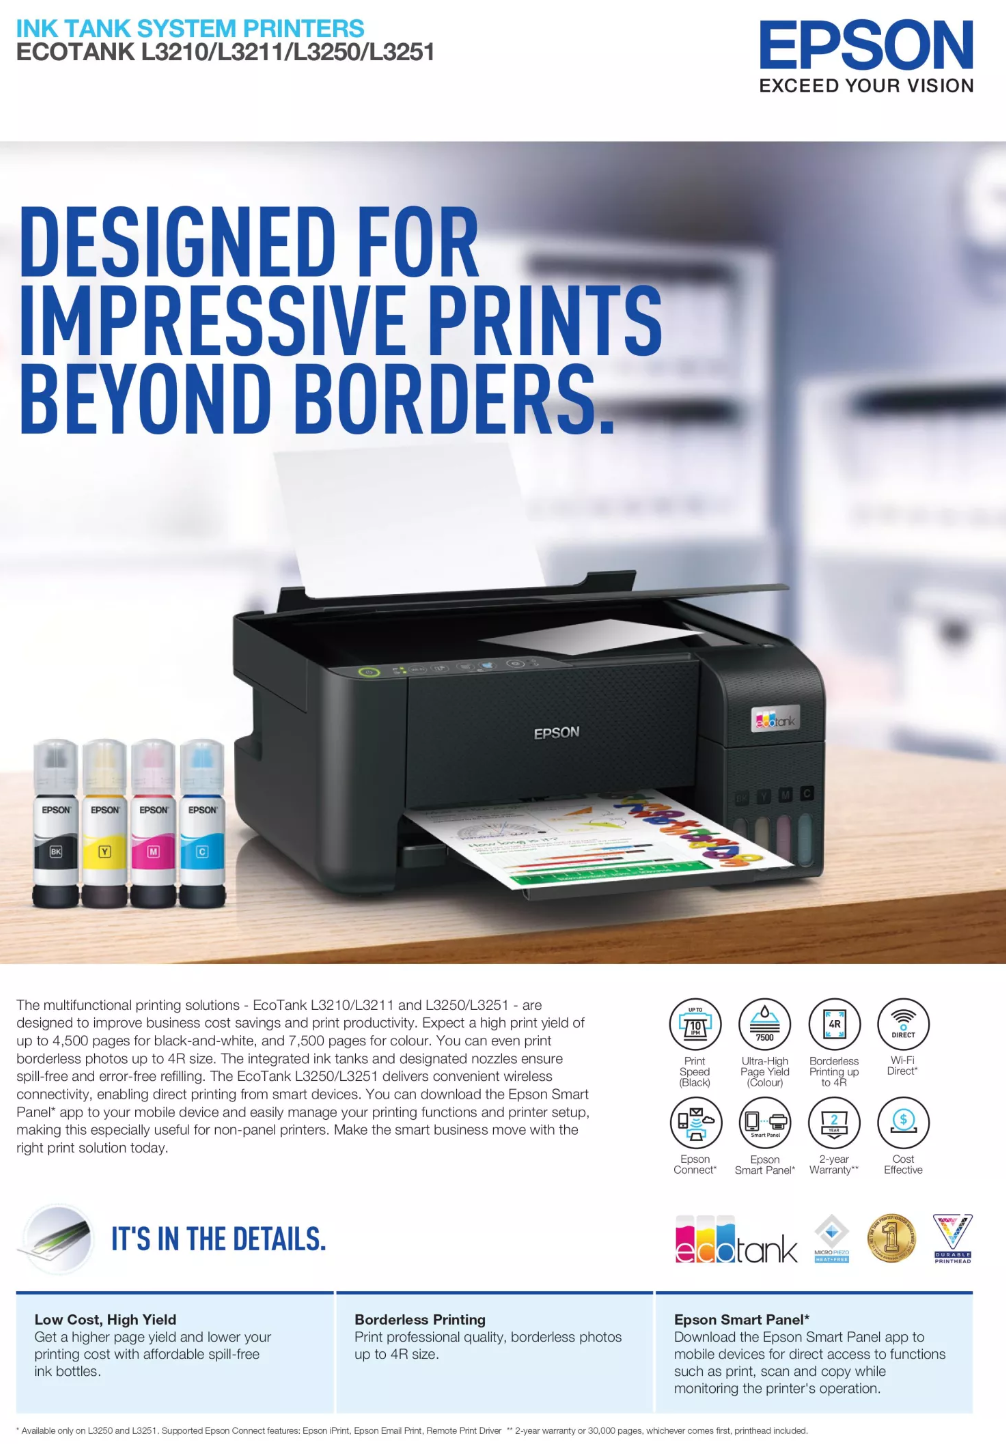 Epson EcoTank L3210 All-in-One Ink Printer – Ink Trading